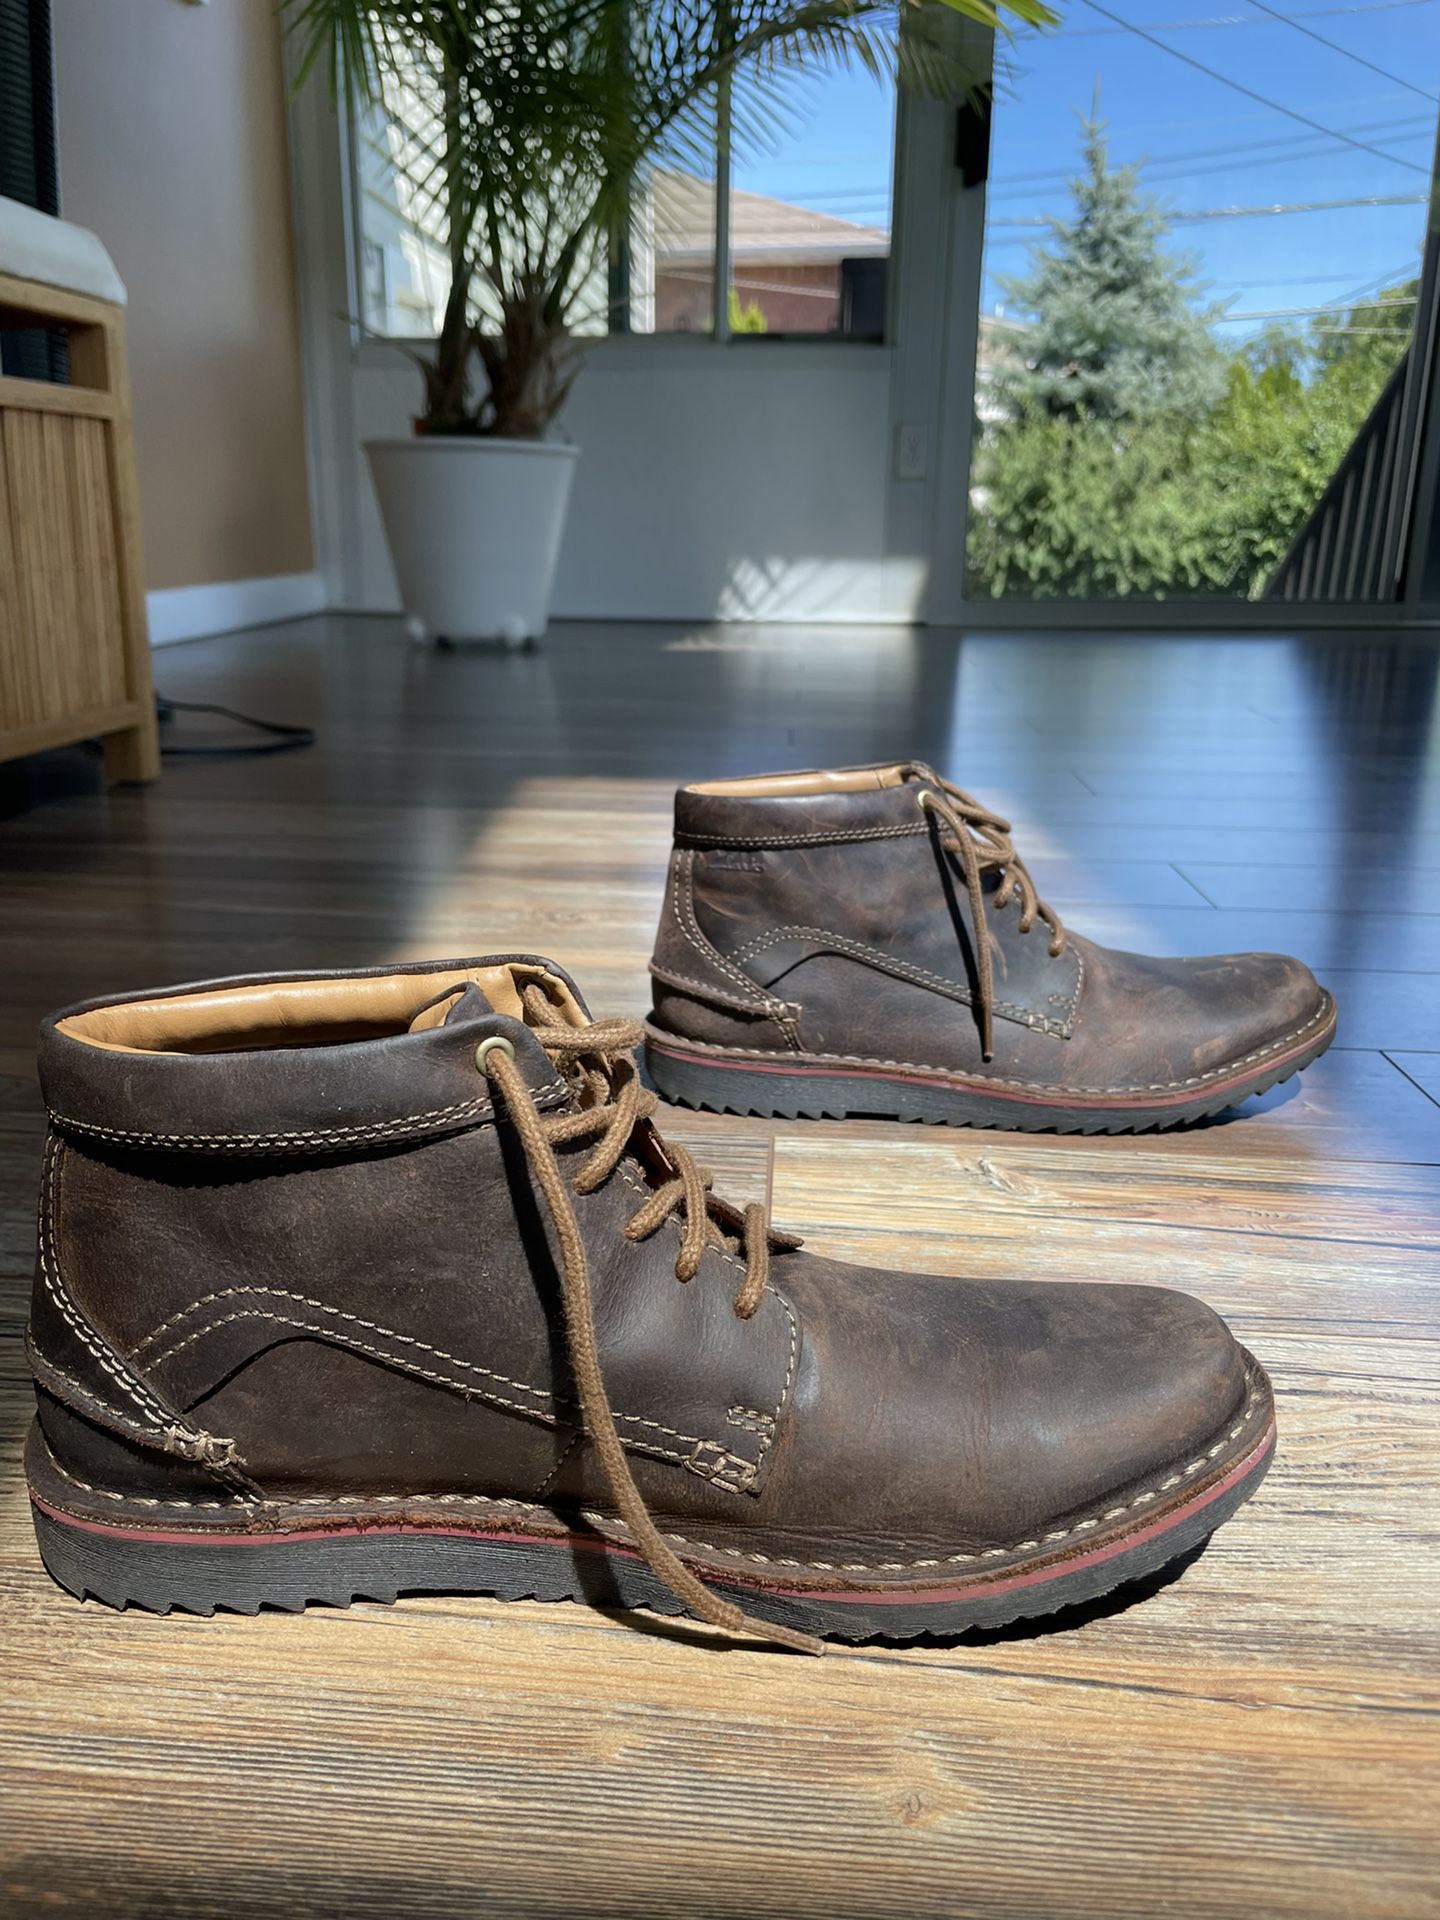 Desplazamiento Extremadamente importante himno Nacional Clarks Mens Boots (size 9 Soft Ortholite Cushion) for Sale in Hicksville,  NY - OfferUp